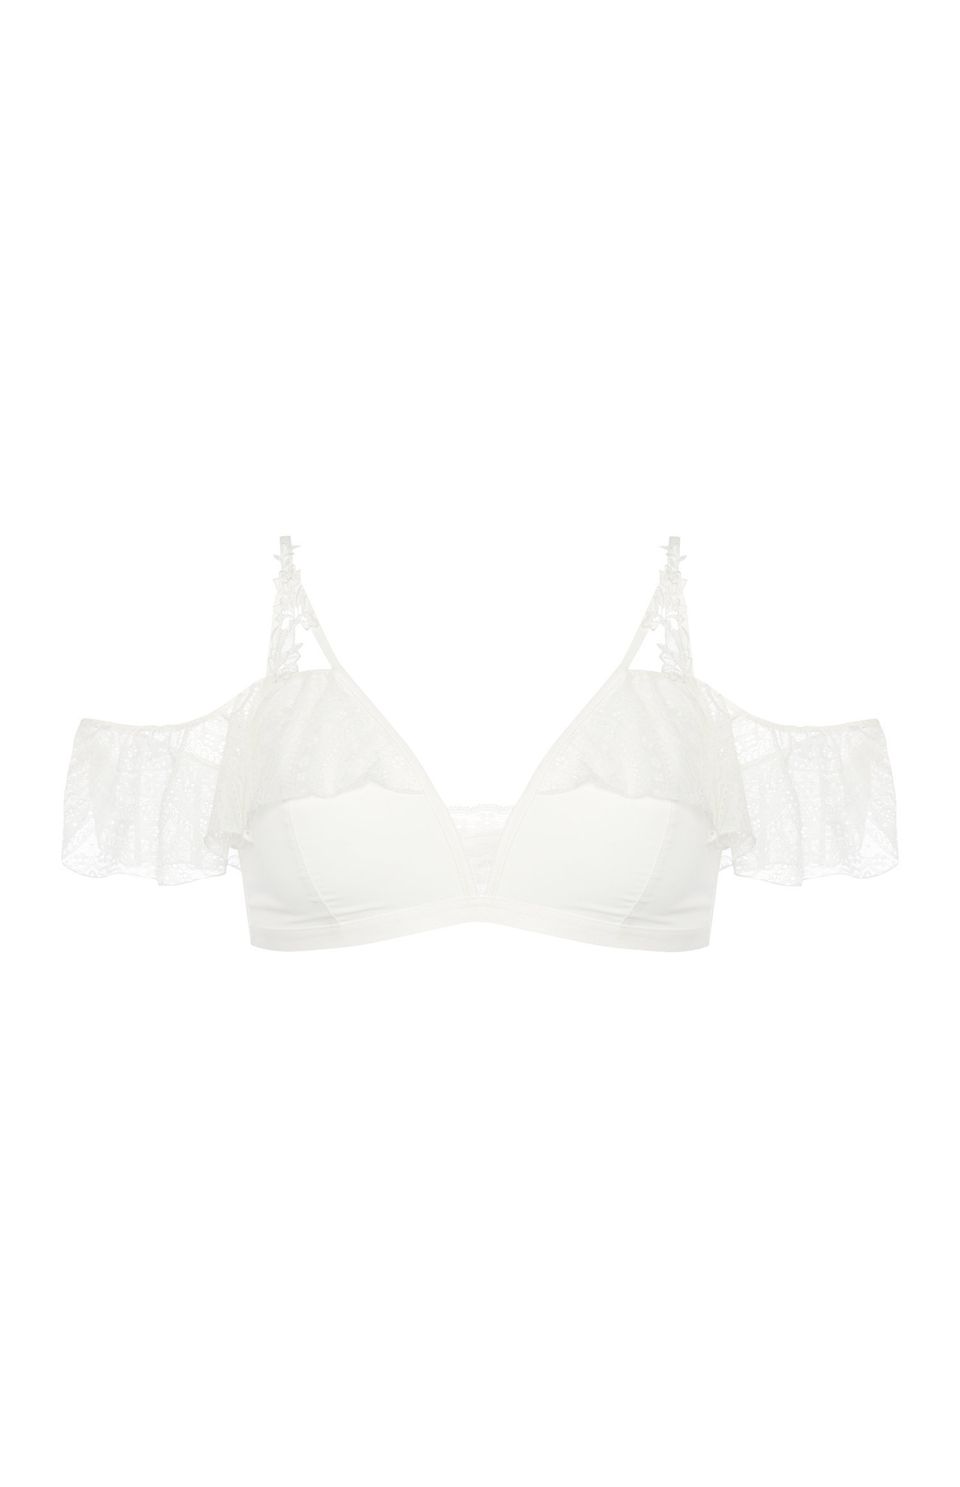 Primark Wedding Lingerie And Nightwear Collection: Everything Is Under £12  And Beyond Dreamy